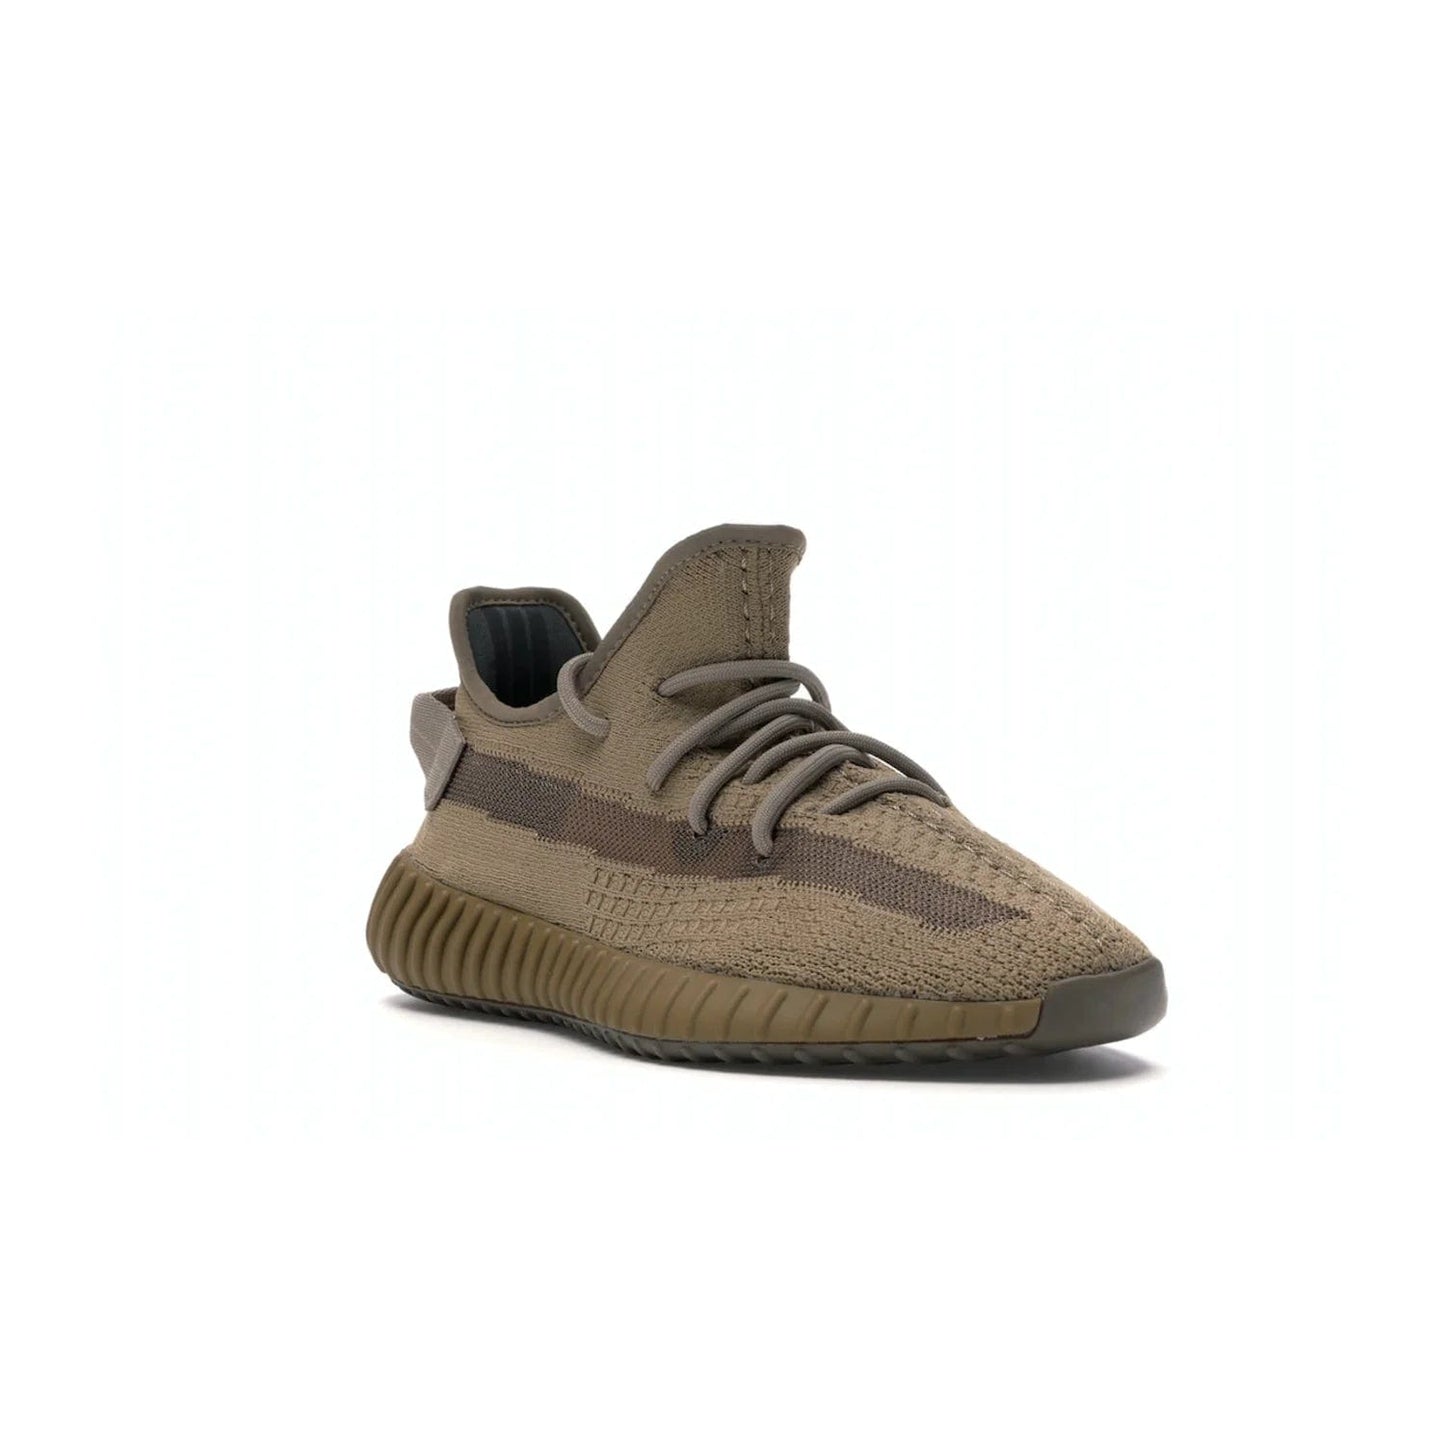 adidas Yeezy Boost 350 V2 Earth - Image 6 - Only at www.BallersClubKickz.com - Abstract style with the adidas Yeezy Boost 350 V2 Earth. Crafted with mud Primeknit upper, mud Boost and interior, and a translucent side stripe. Regional exclusive in Earth/Earth/Earth colorway, these fashionable sneakers released in February 2020. Showcase your style with the Yeezy 350 V2 Earth.